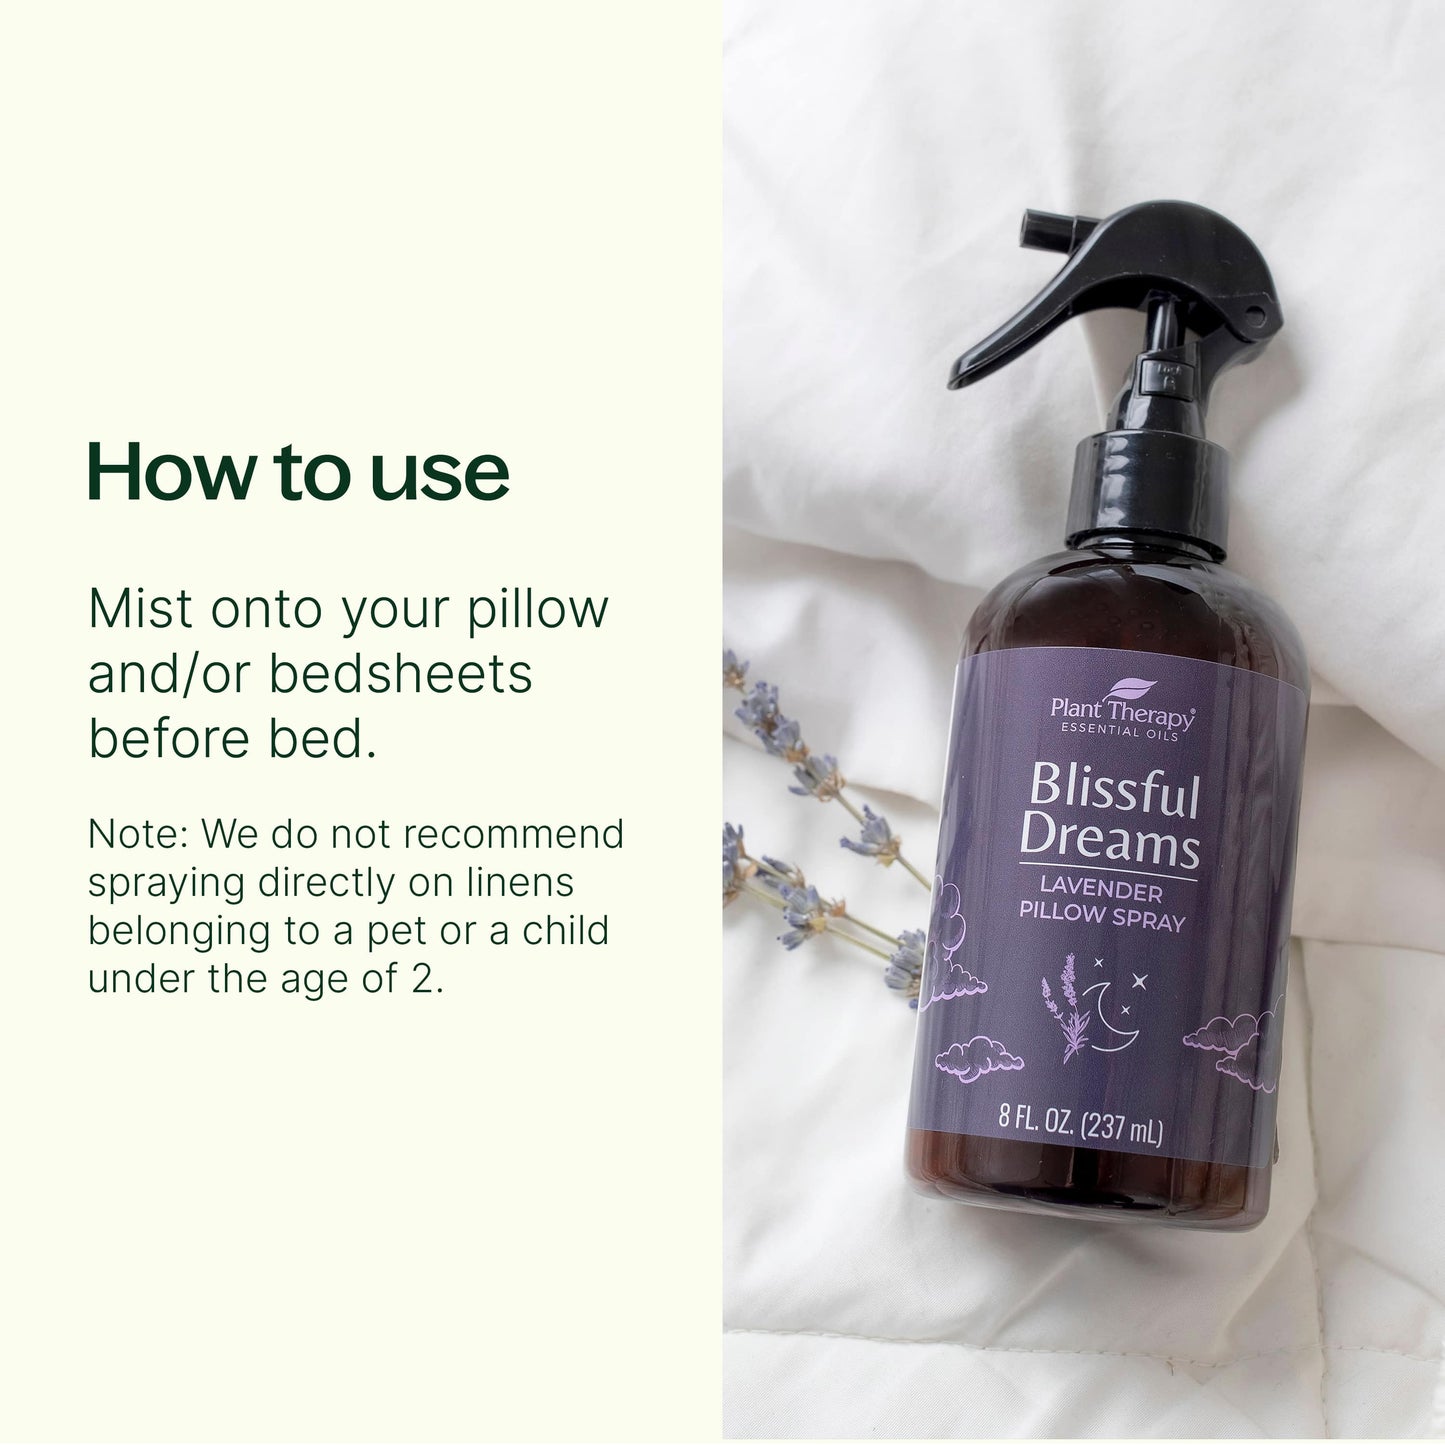 Blissful Dreams Lavender Pillow Spray, mist onto your pillow and bed.